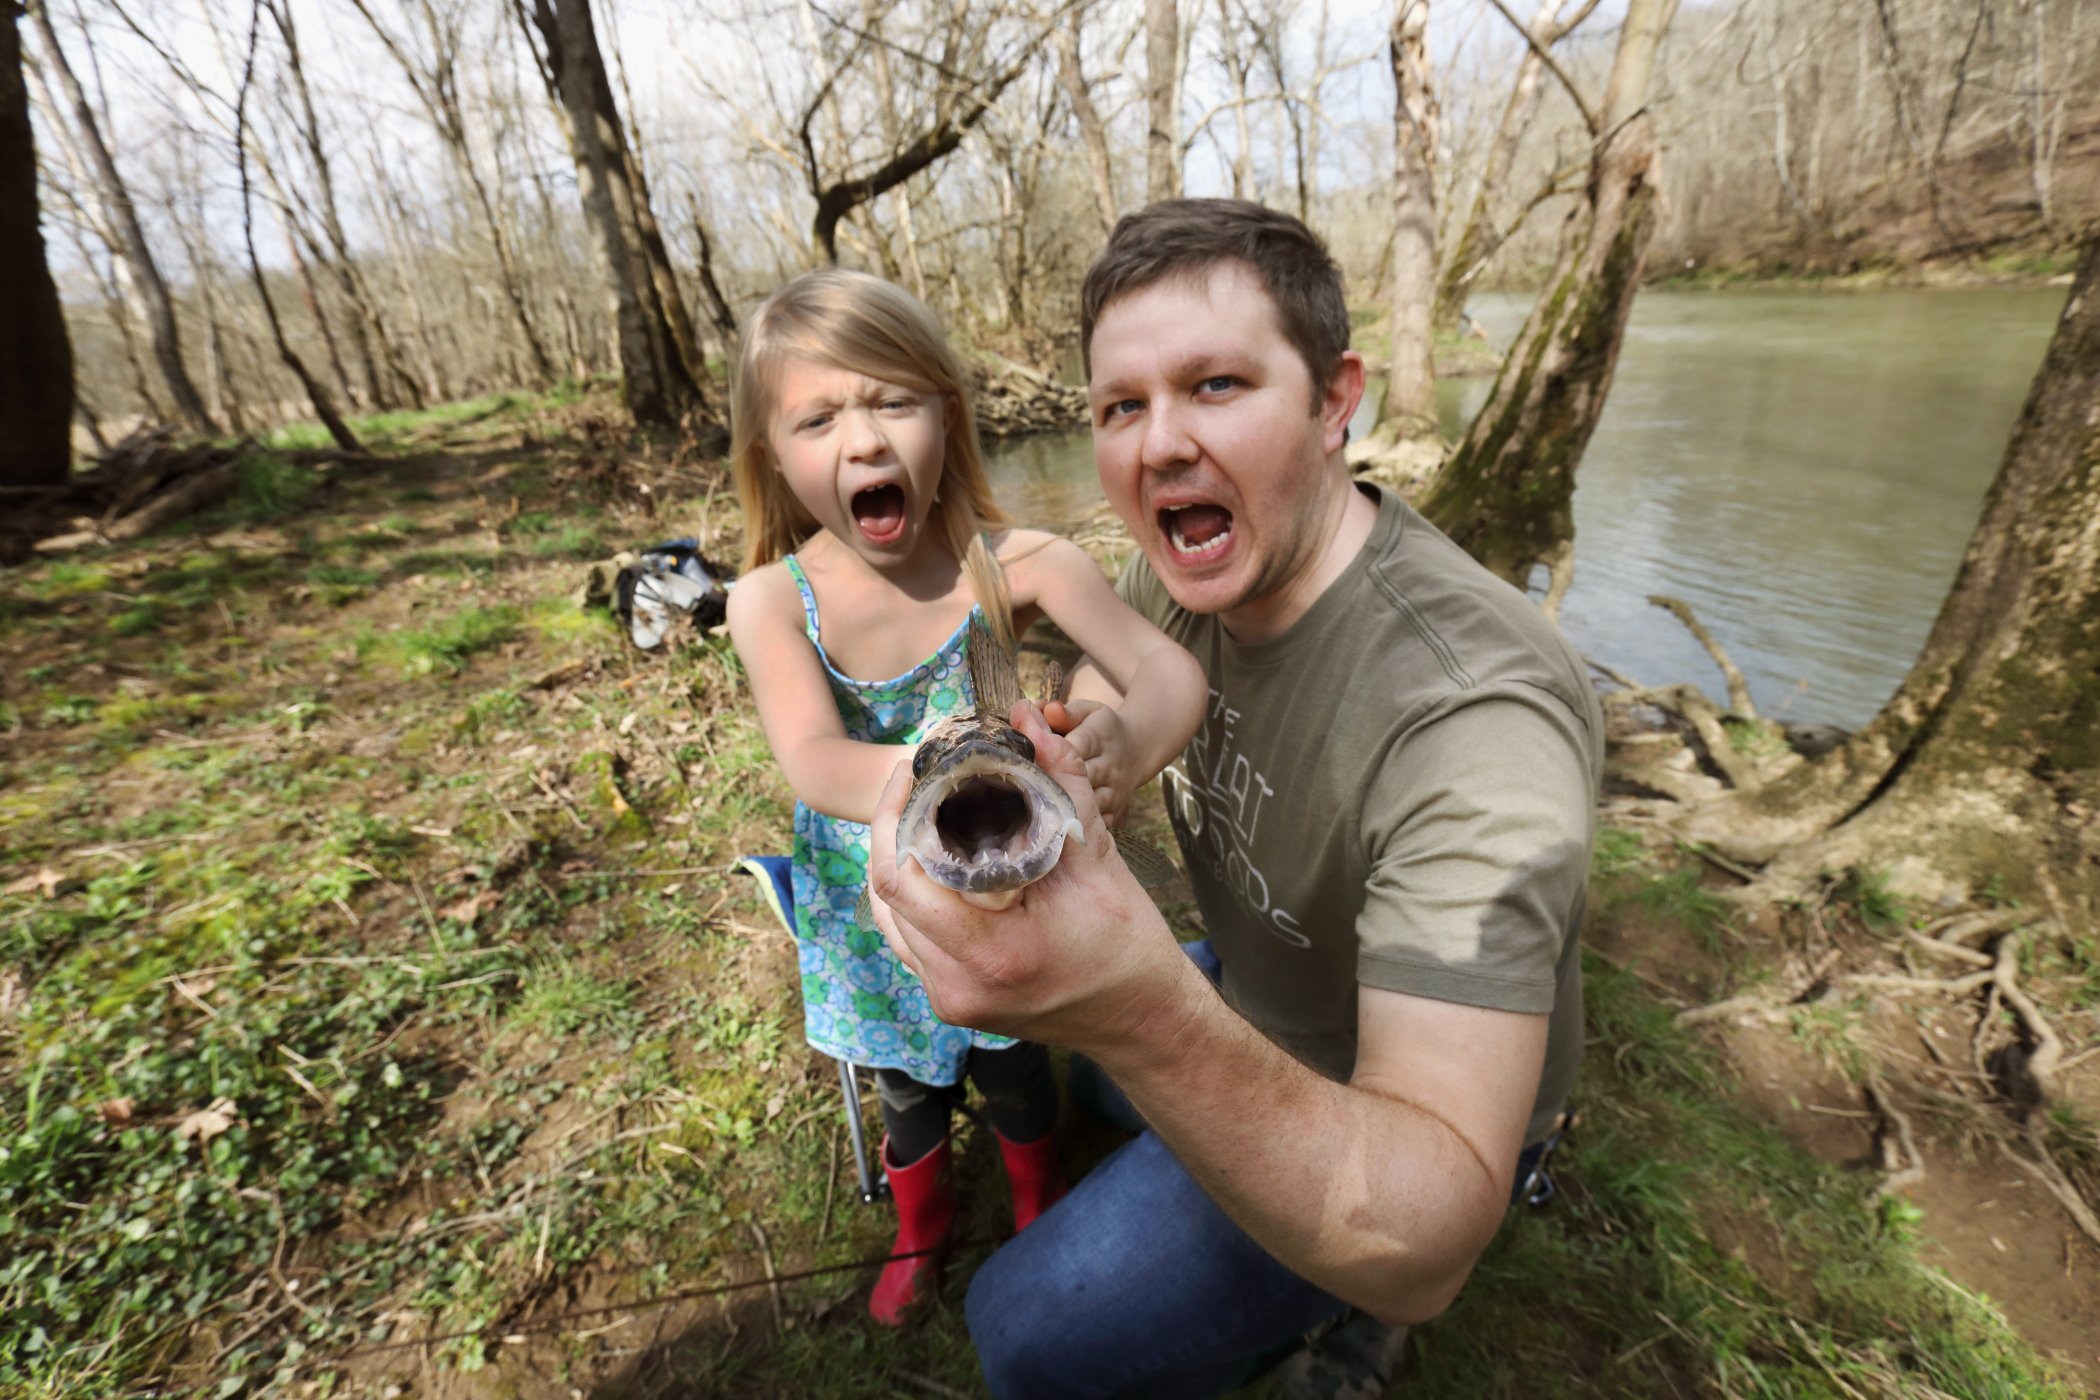 A little girl and a man are holding up a large fish and making open mouthed expressions